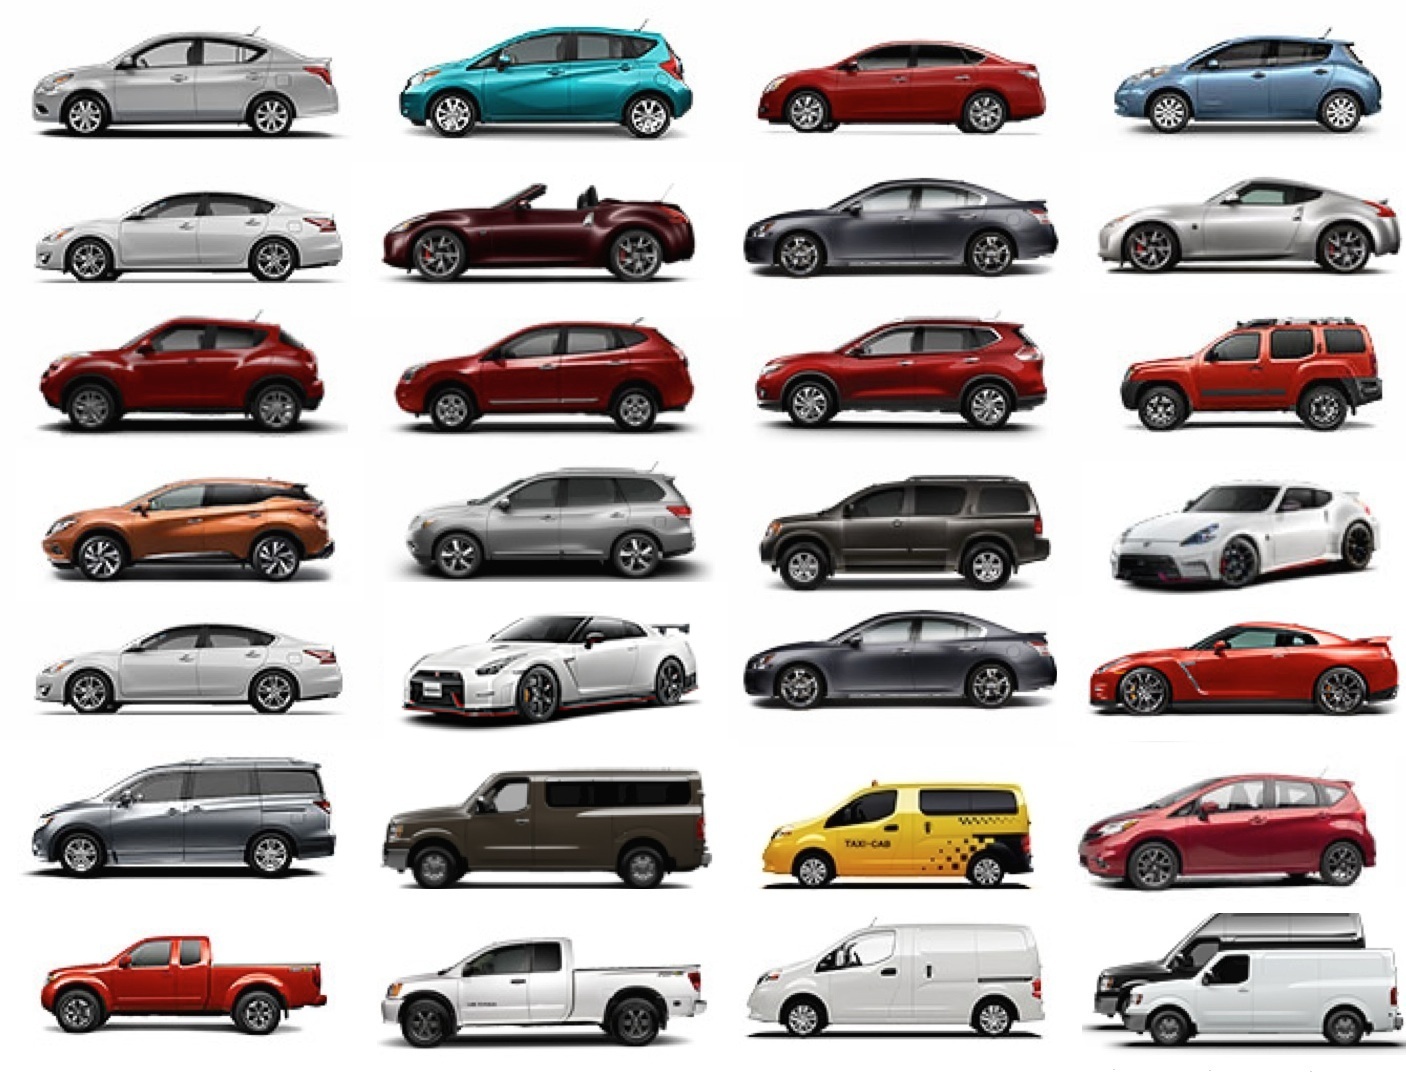 The 2015 Nissan Lineup